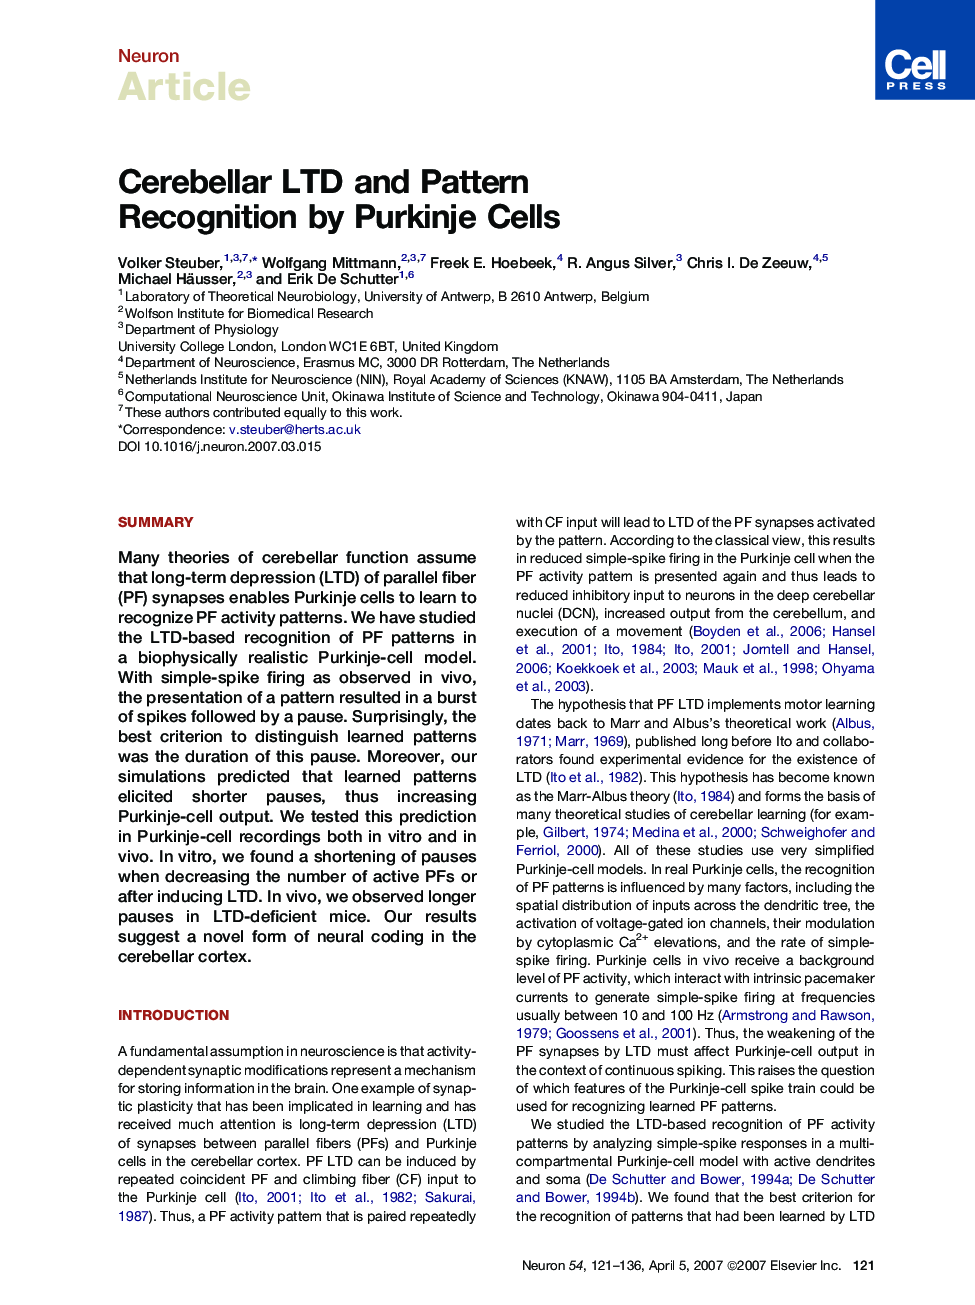 Cerebellar LTD and Pattern Recognition by Purkinje Cells